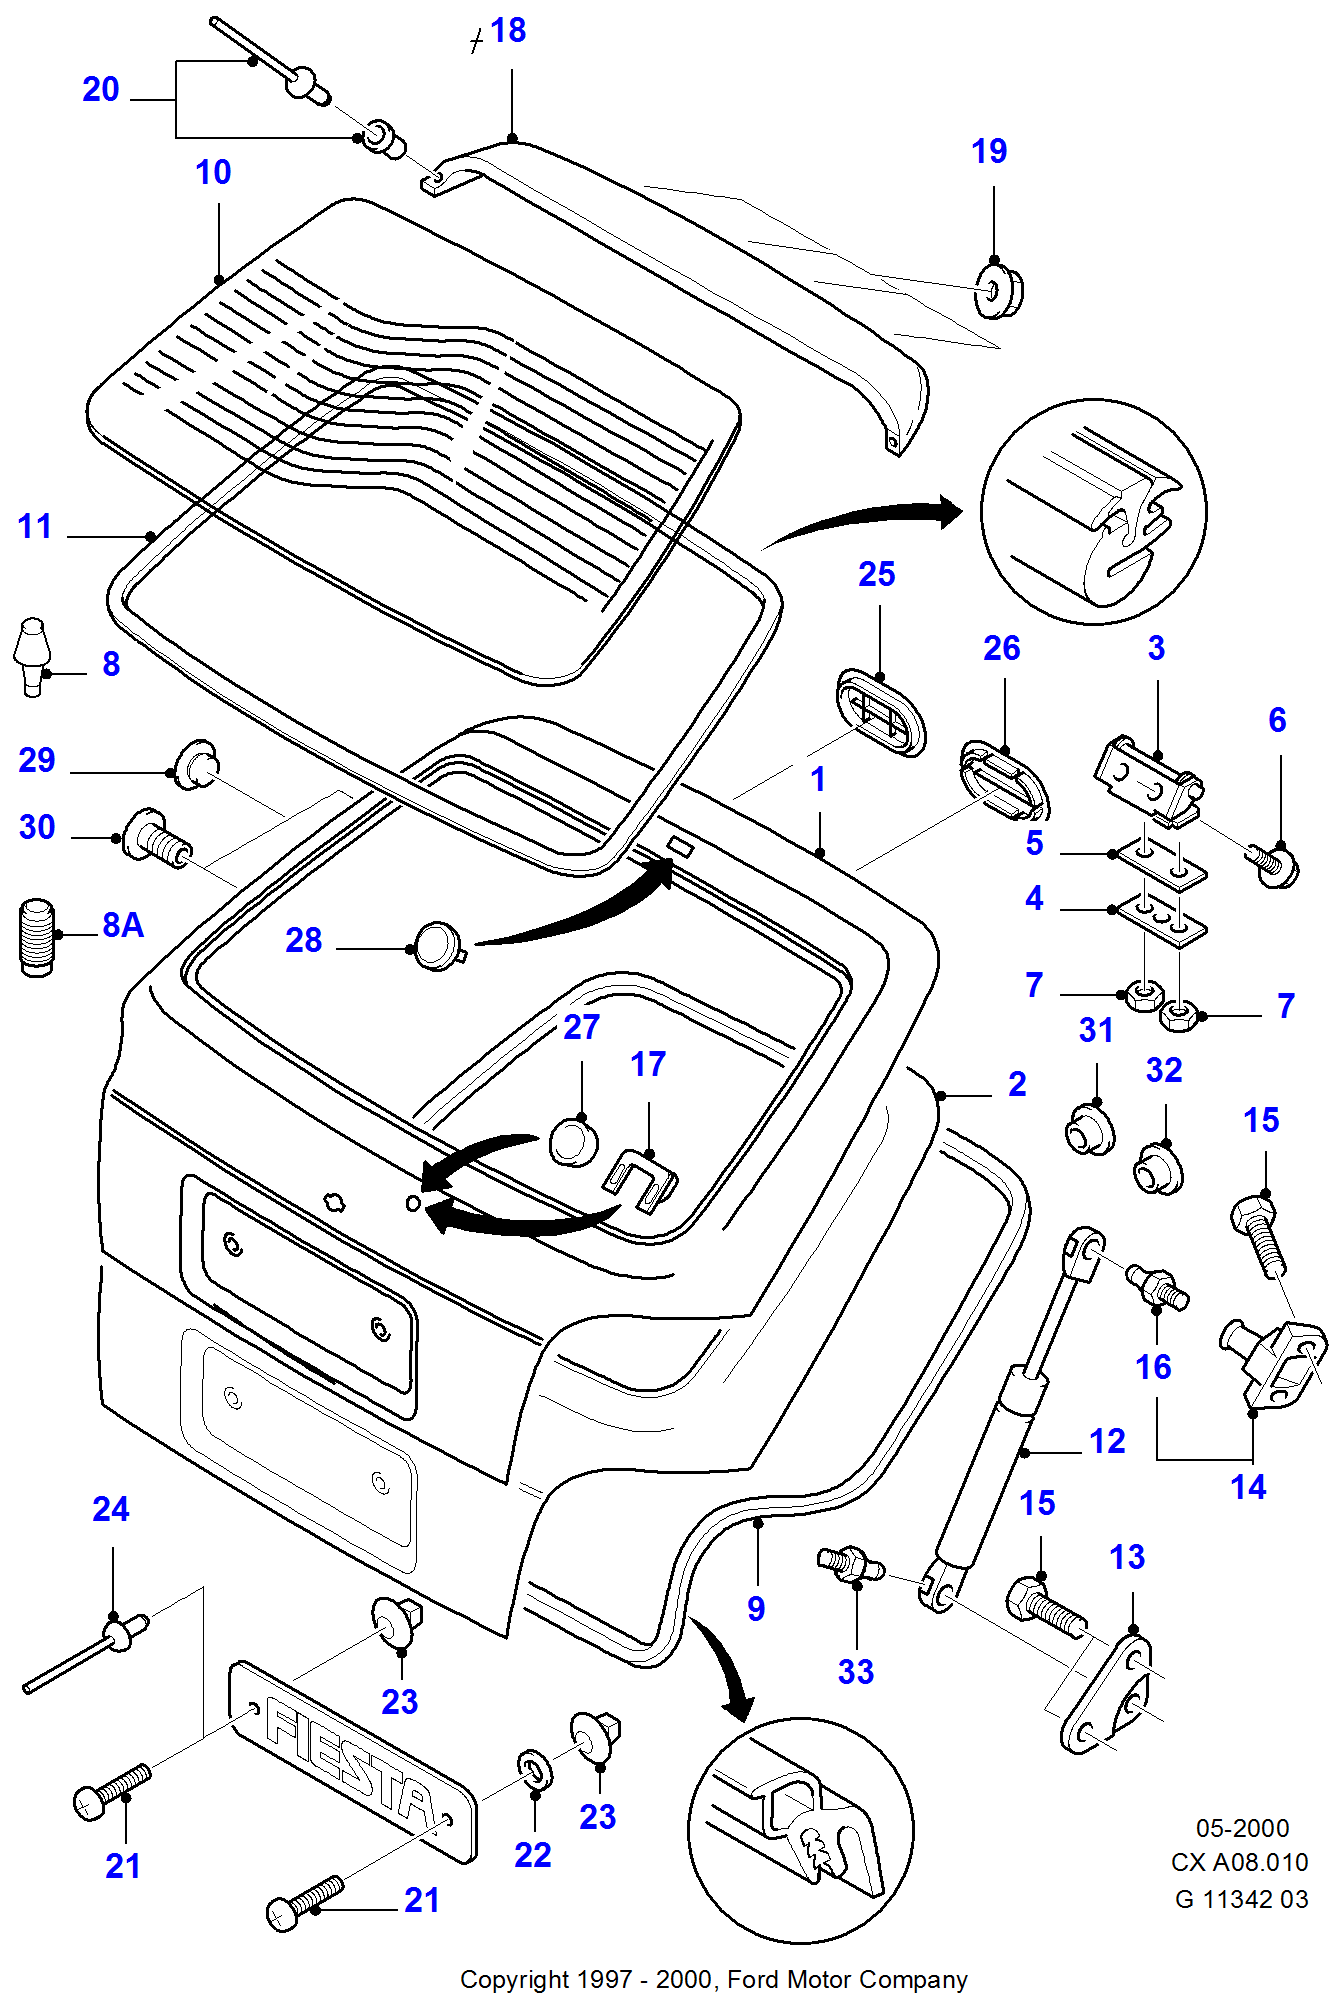 Tailgate And Related Parts por Ford Fiesta Fiesta 1989-1996               (CX)